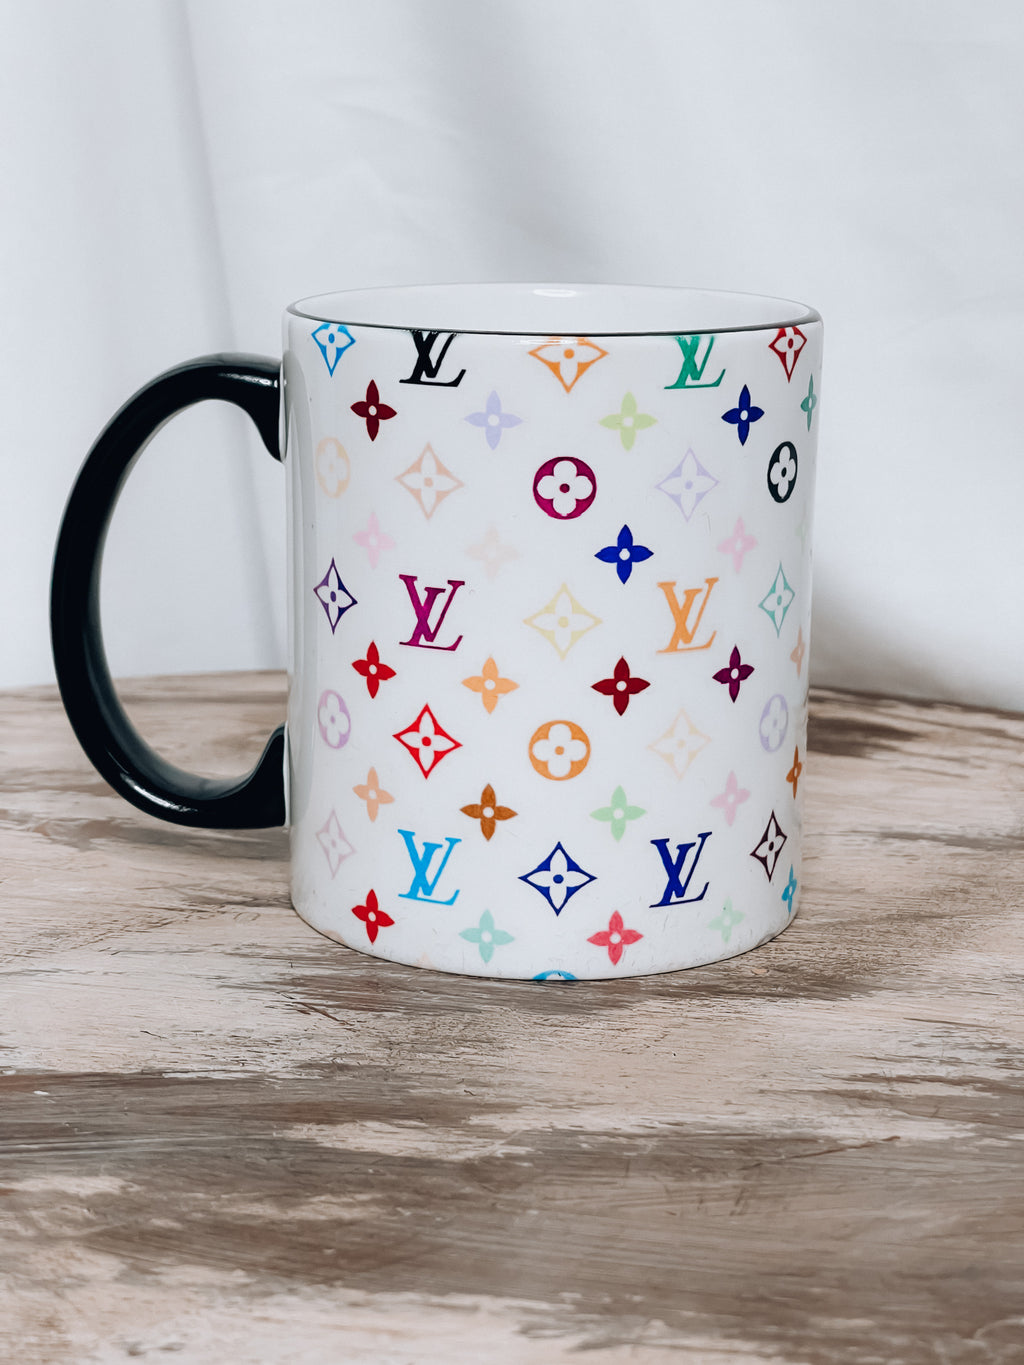 Wake up and start your morning off right with a good cup of coffee in your new mug. This mug is the perfect gift for that person in your life with that boujee personality. Make great gifts!   Ceramic mug 11 oz.  Double sided print Top rack dishwasher safe.  Microwave safe 